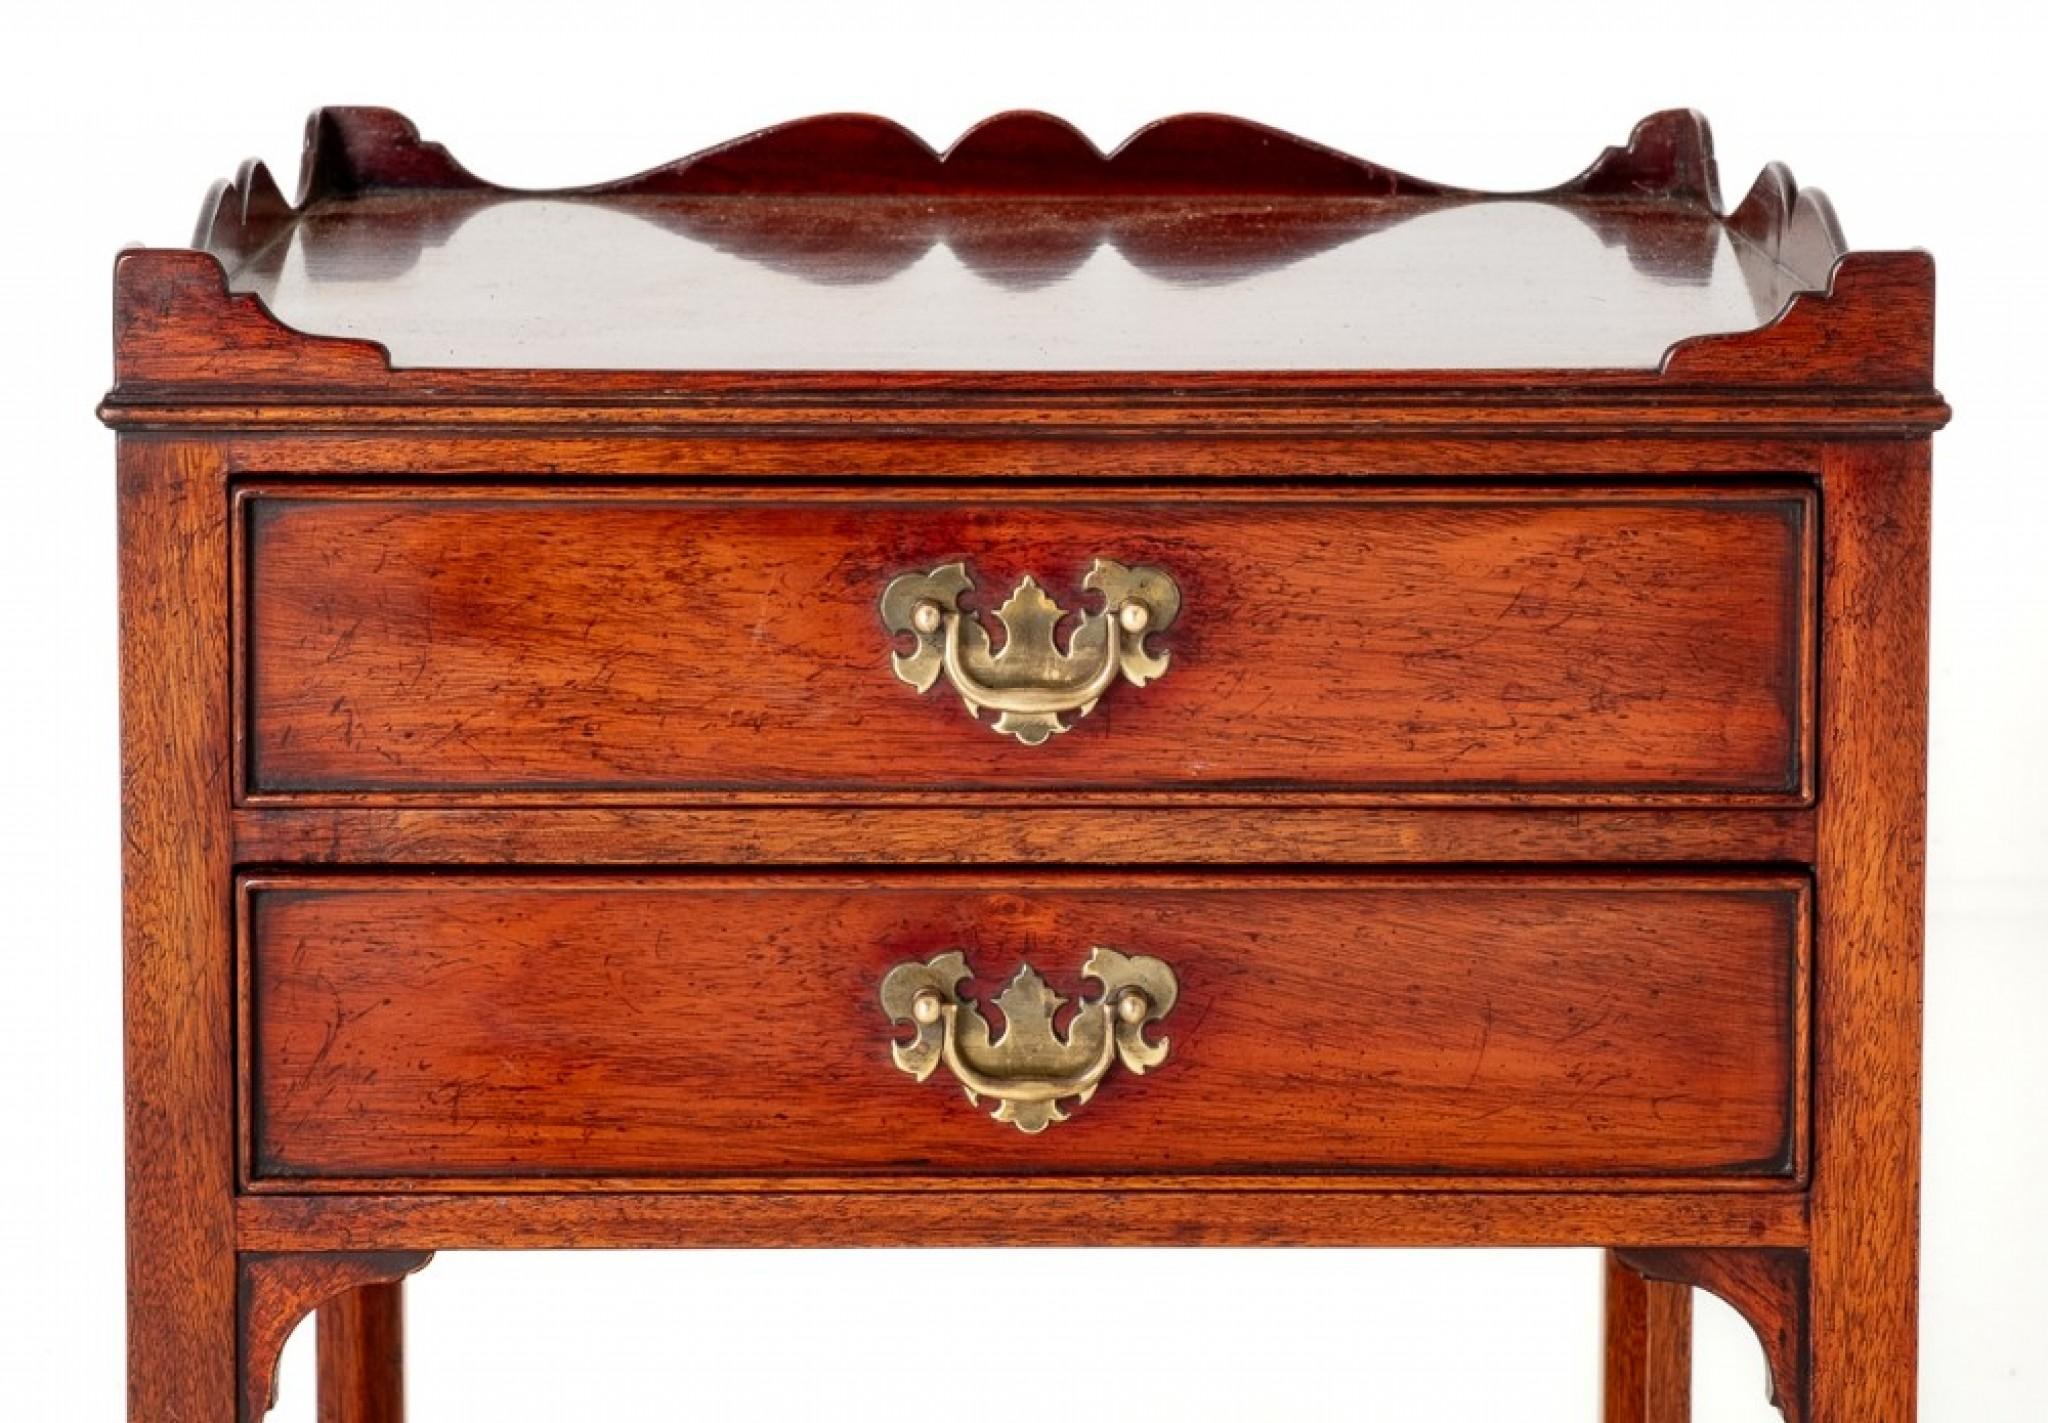 Georgian Style Mahogany Bedside Cabinet.
This Cabinet is Raised upon Chamfered Legs With a Mahogany Undertray.
Circa 1910
Featuring 2 x Oak Lined Drawers Which Retain Their Original Brass Plate Handles.
The Top of the Cabinet Having a Shaped